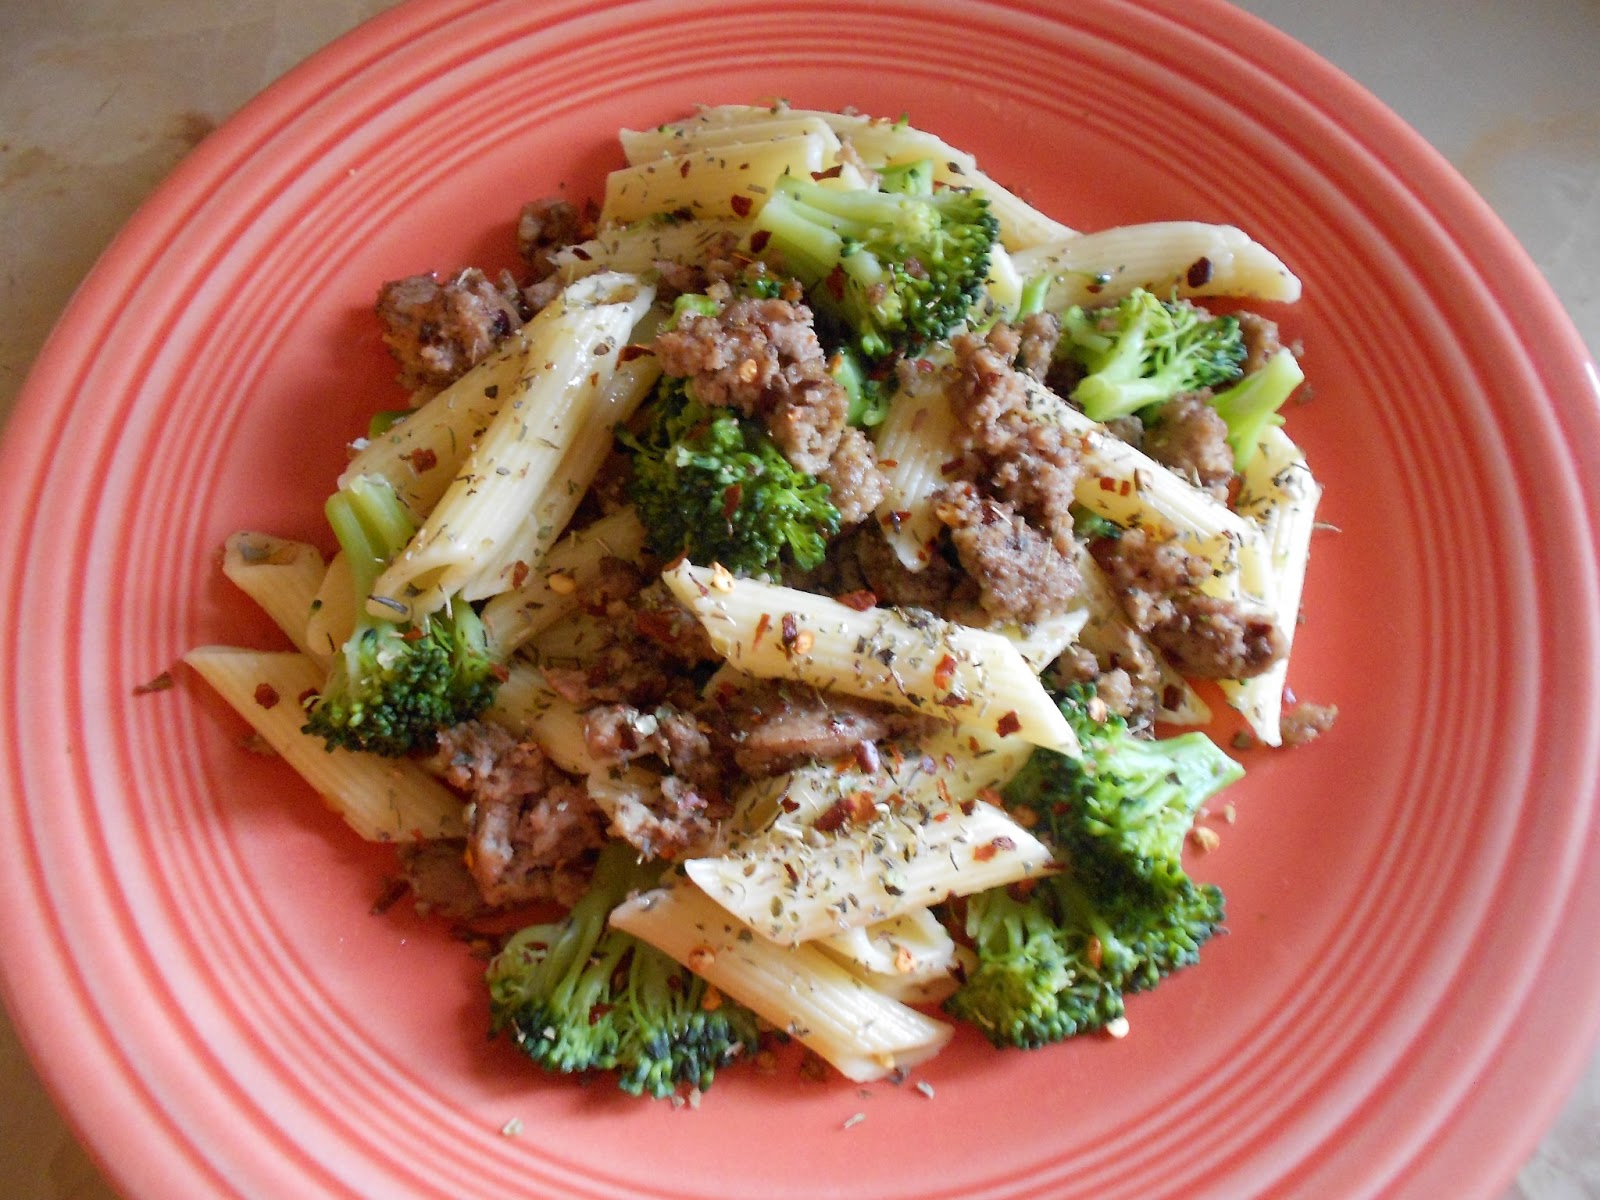 A Healthy Dinner, Pasta With Ground Turkey and Broccoli Frugal Family